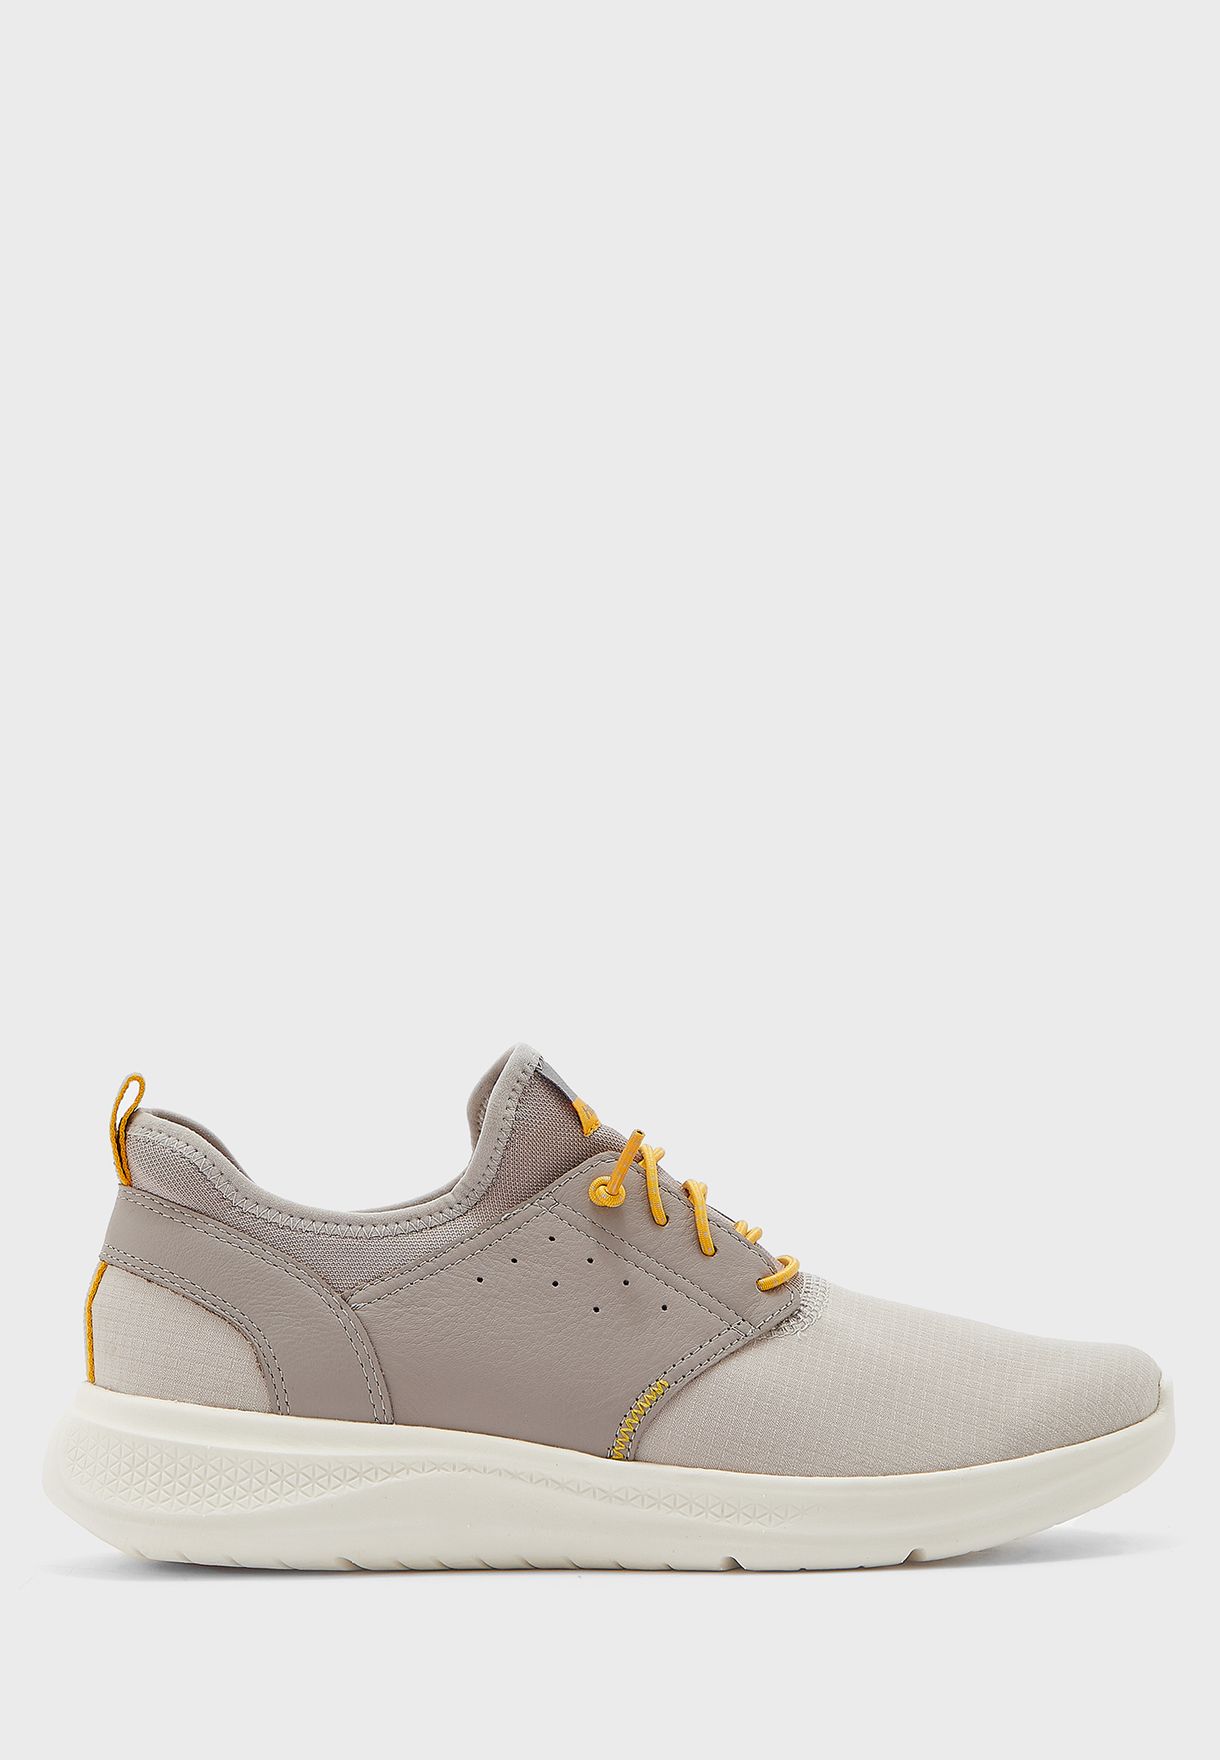 Elevate Bungee Lace Up Sneakers